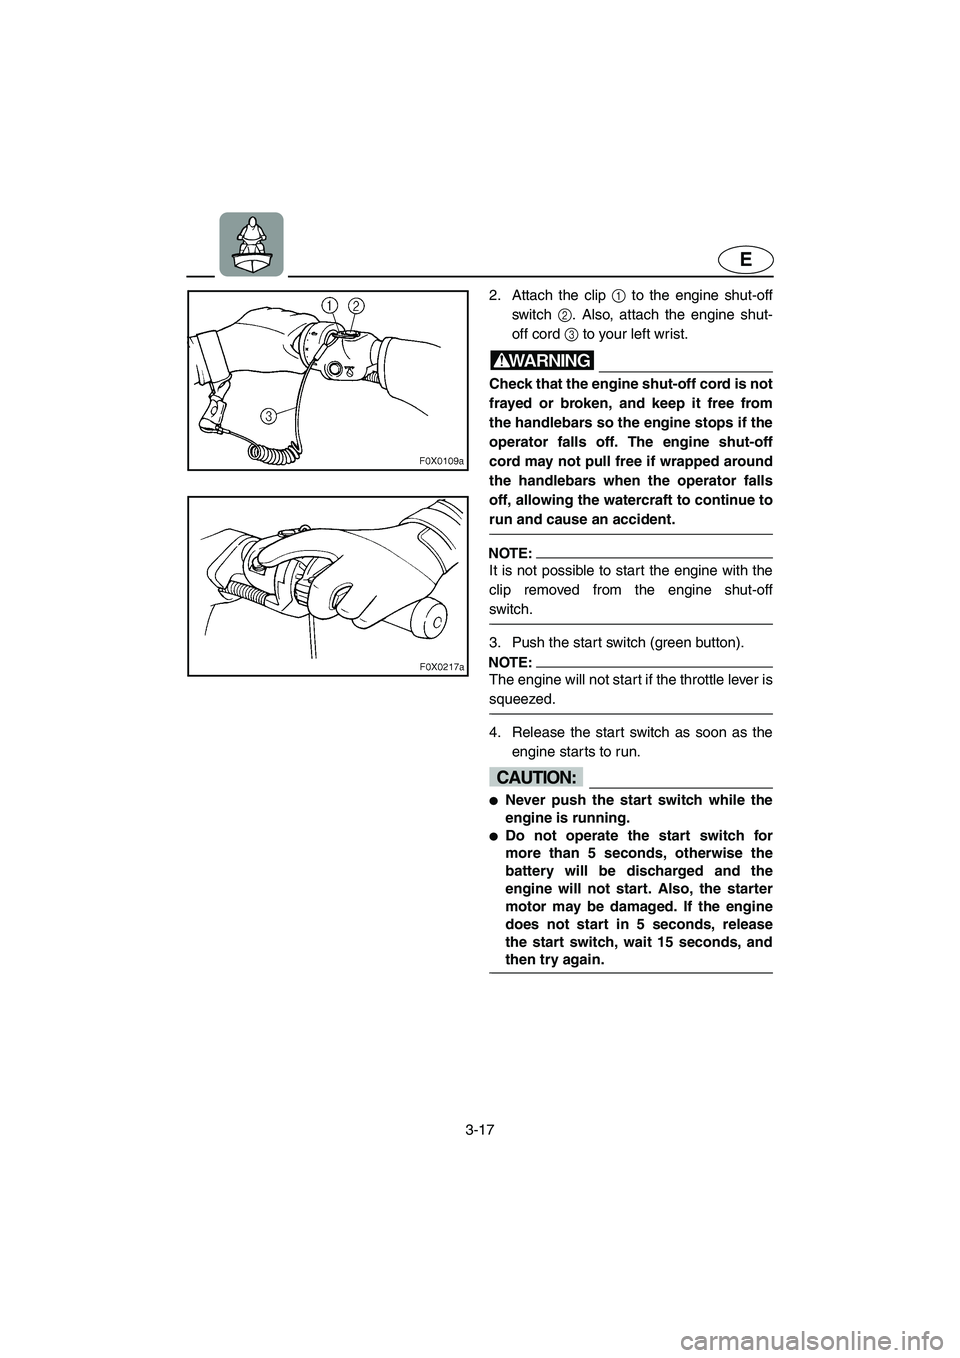 YAMAHA GP1300R 2003 User Guide 3-17
E
2. Attach the clip 1 to the engine shut-off
switch 2. Also, attach the engine shut-
off cord 3 to your left wrist.
WARNING@ Check that the engine shut-off cord is not
frayed or broken, and keep